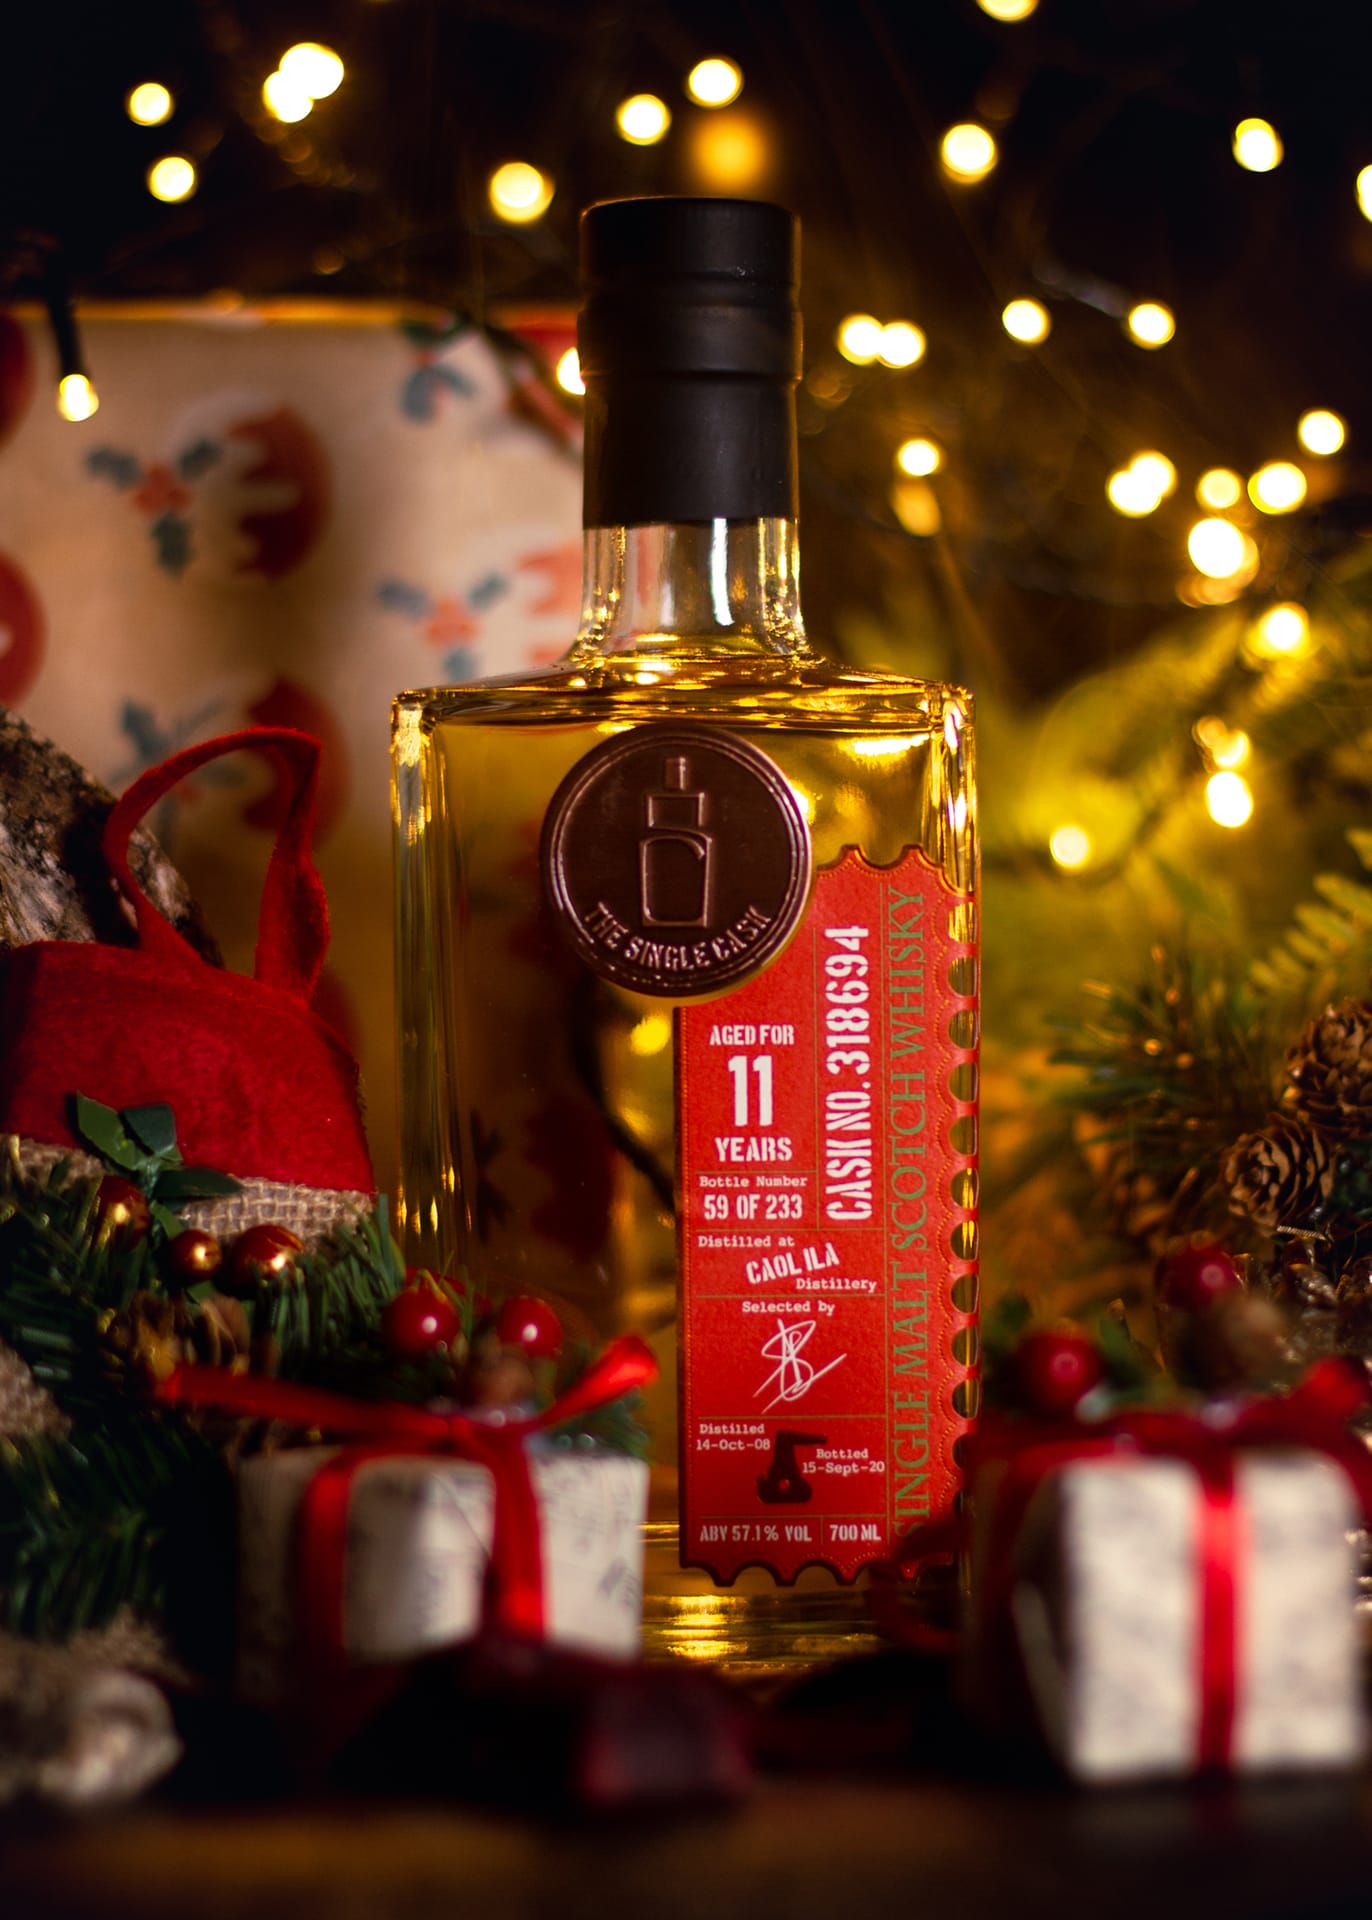 Caol Ila 11 year old whisky (Christmas Special)